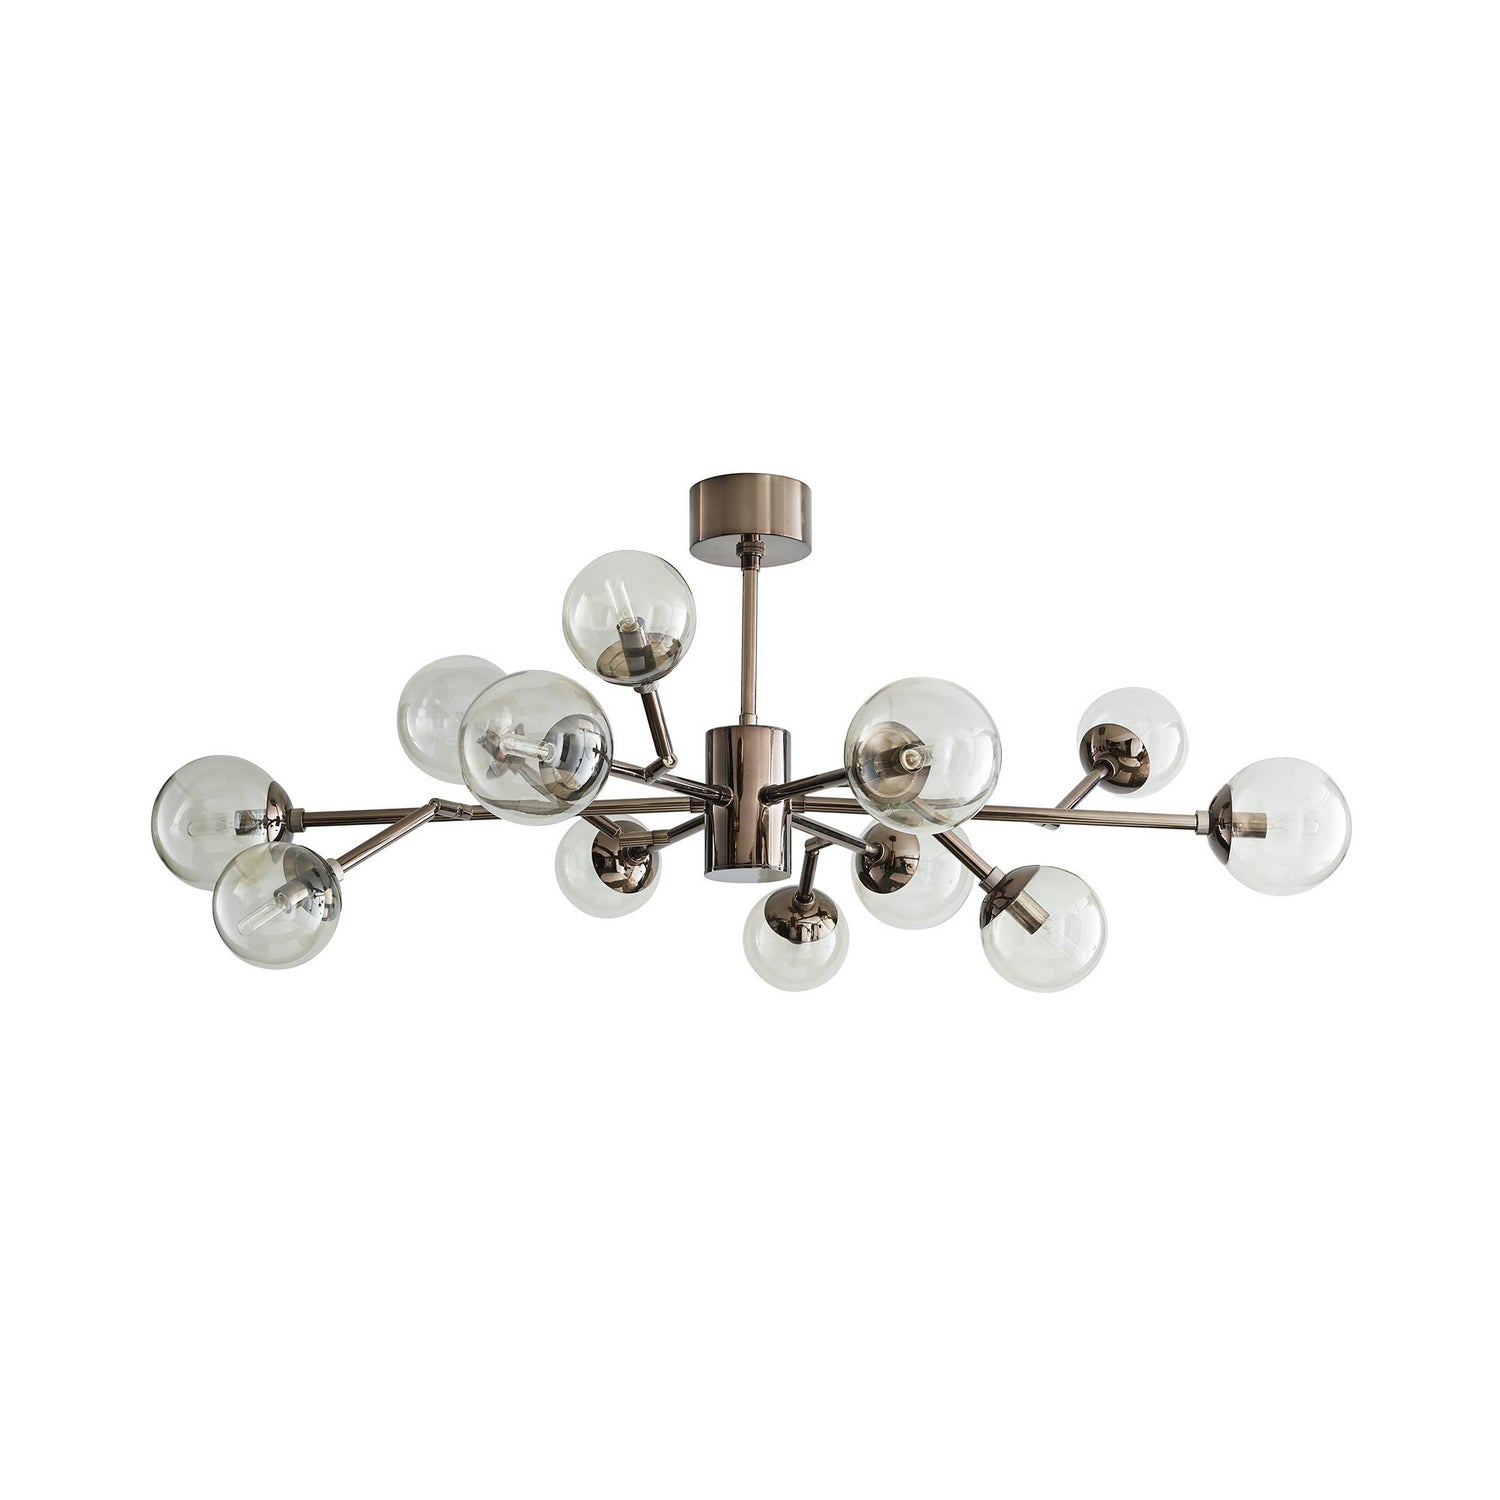 12 Light Chandelier from the Dallas collection in Brown Nickel finish